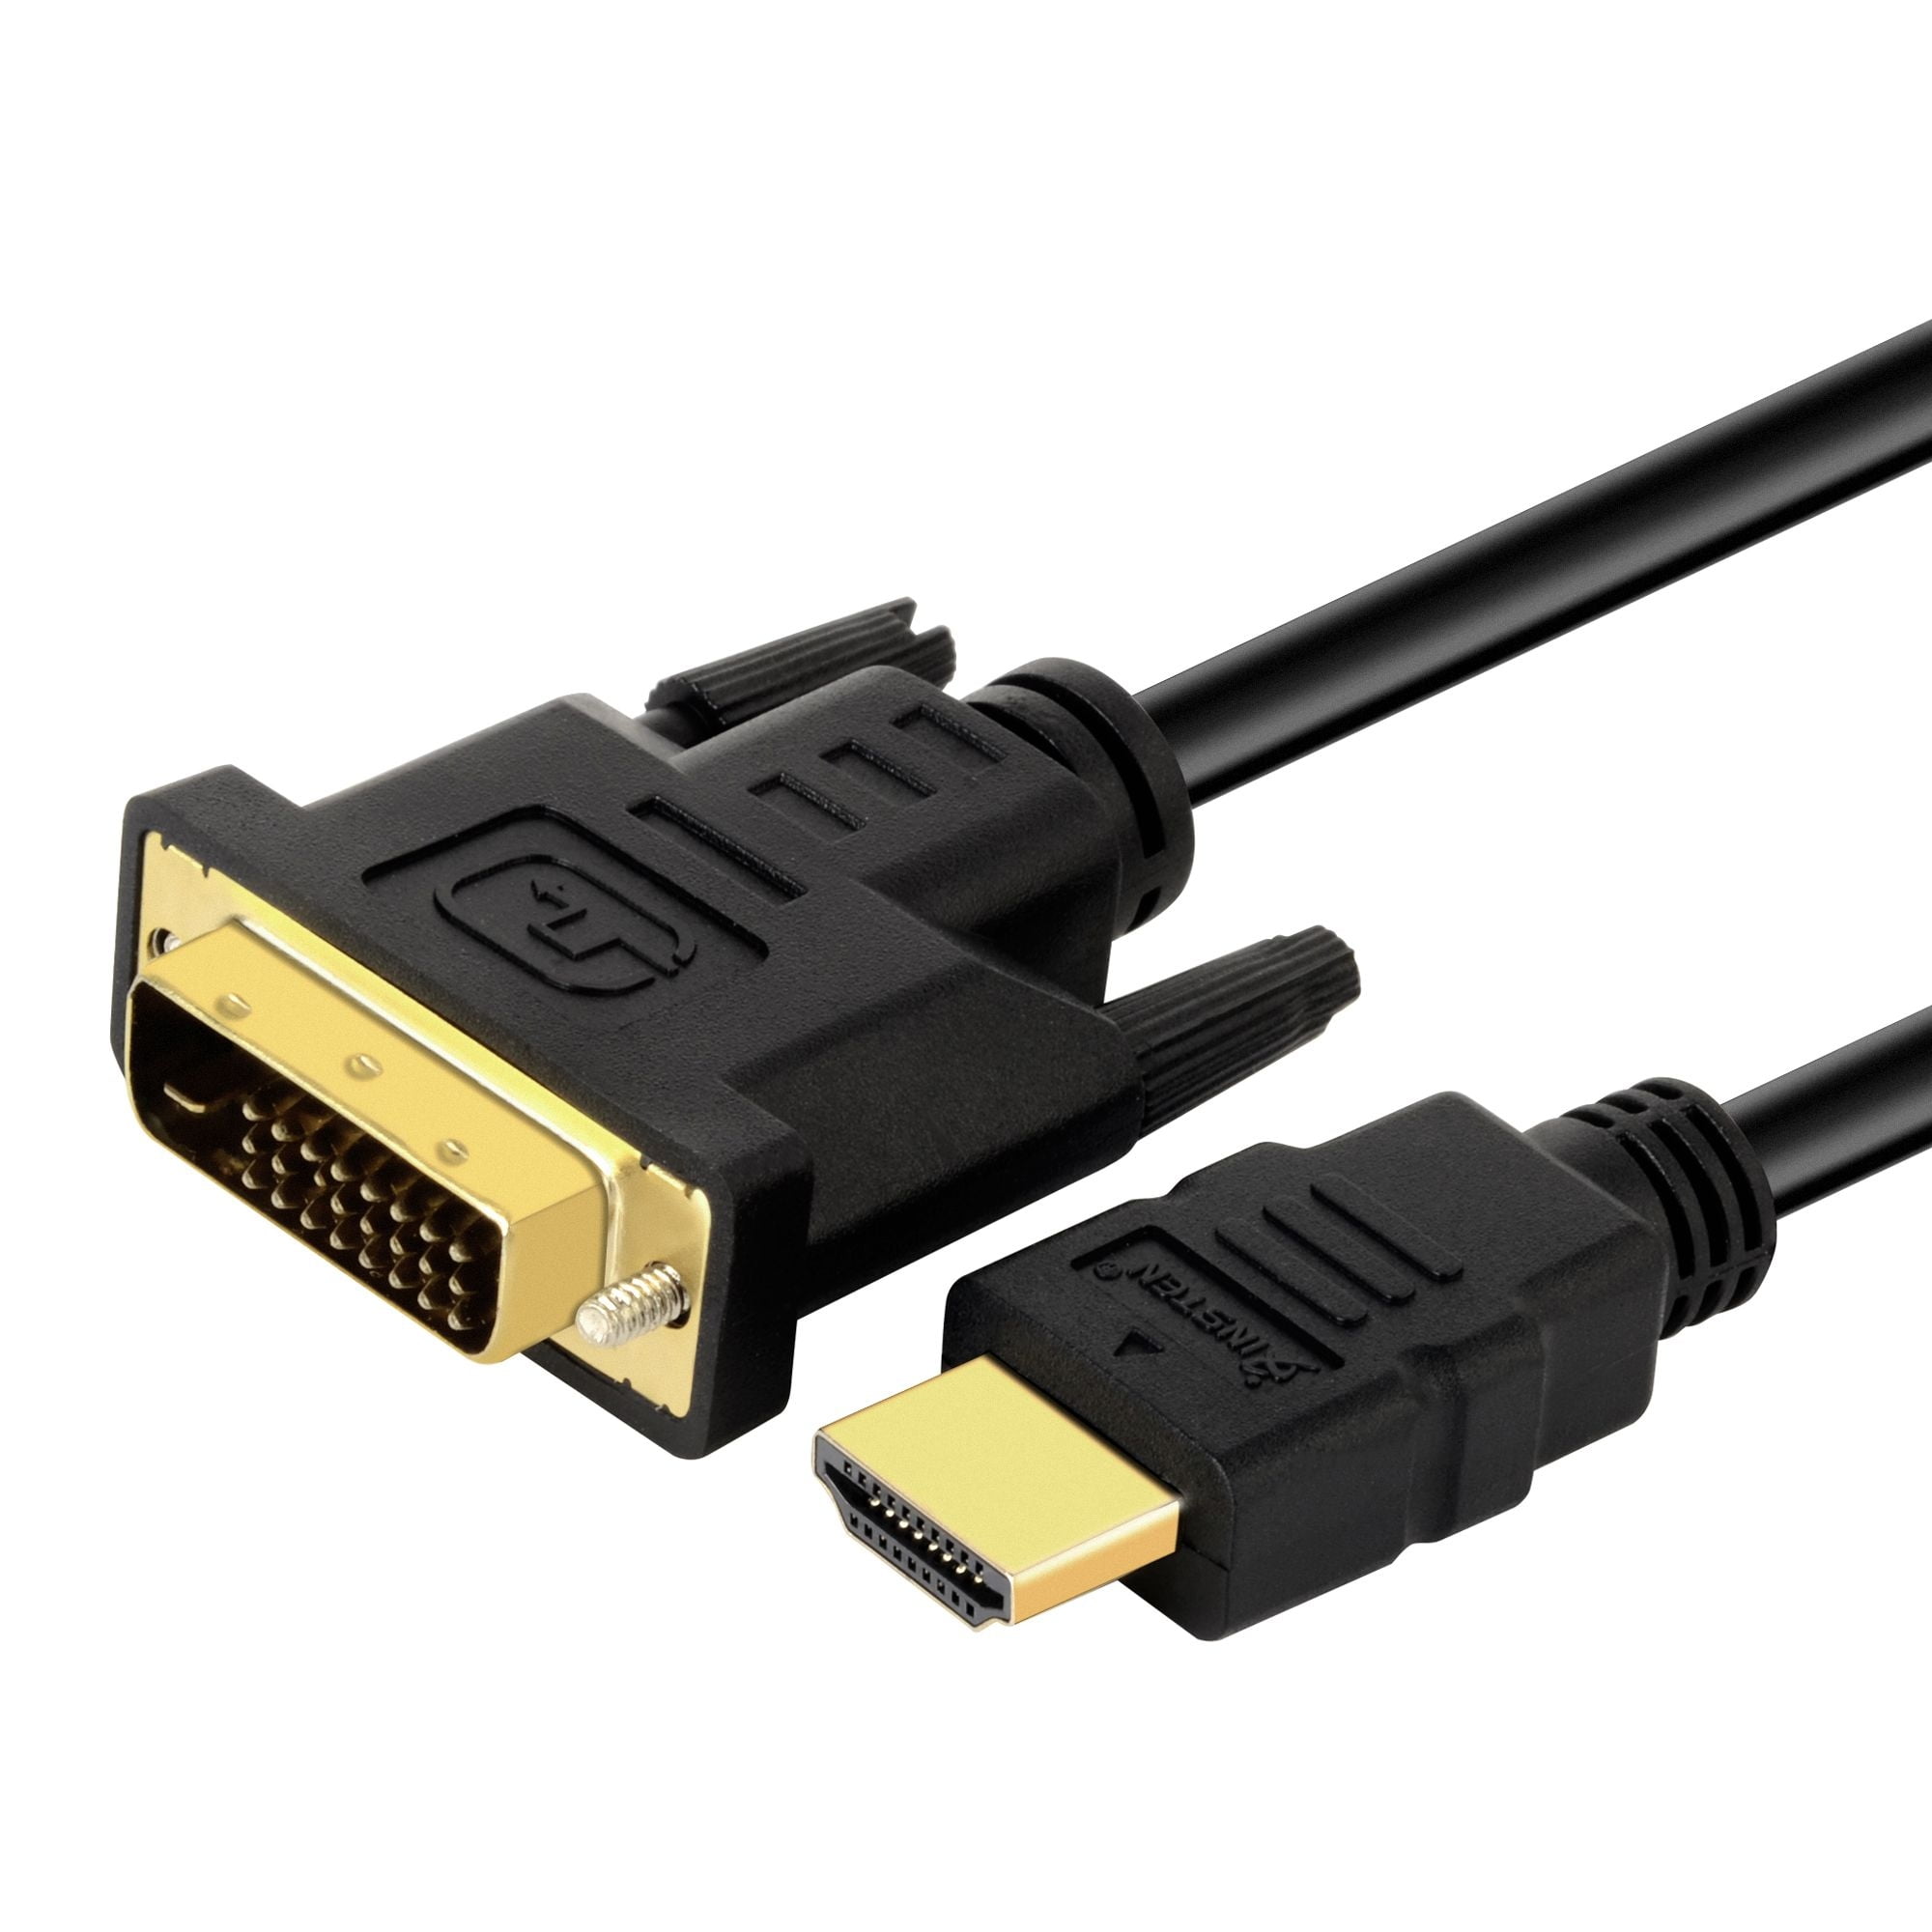 HDMI to DVI Adapter HDMI to DVI Cable by Insten HDMI to DVI Adapter Cable  6ft